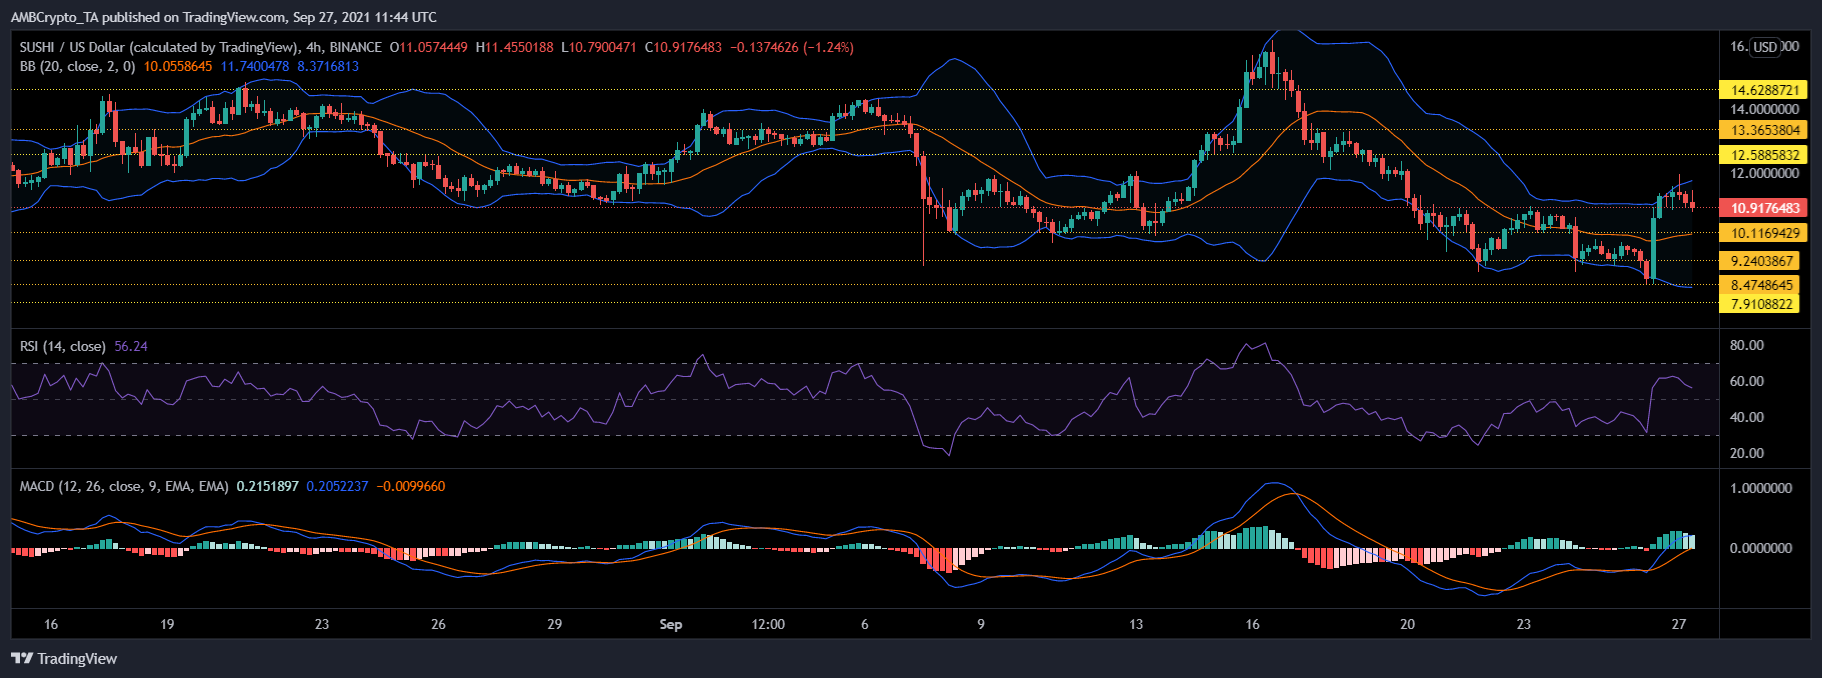 Ethereum Classic, Chainlink and Sushiswap Price Analysis: 27 September 